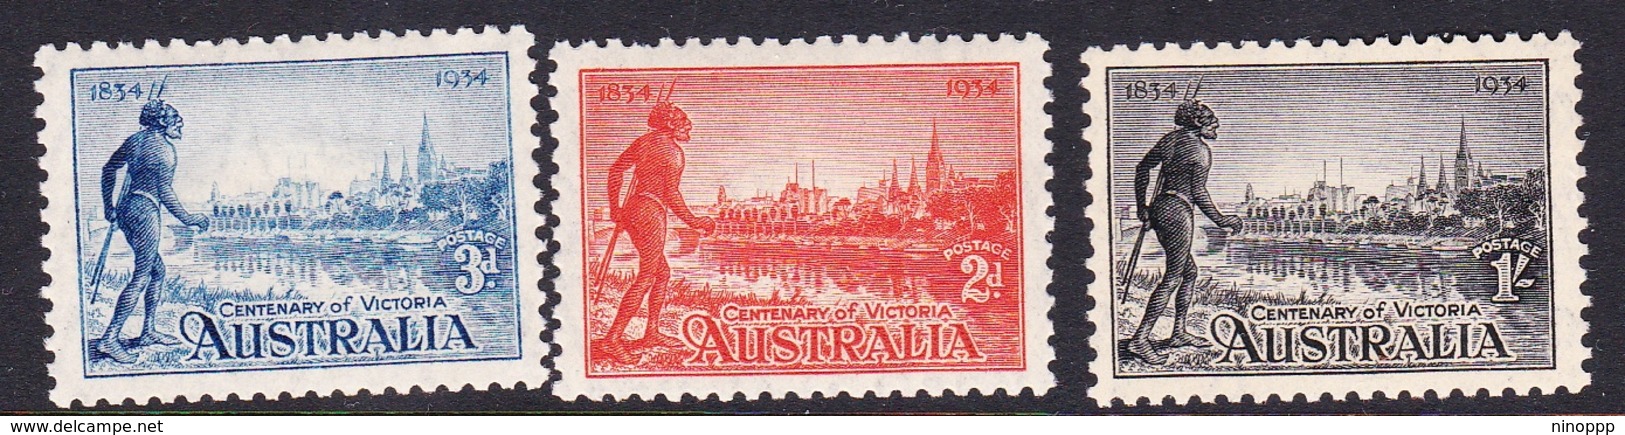 Australia SG 147-149 1934 Centenary Of Victoria Perf 10.5, Mint Never Hinged - Neufs